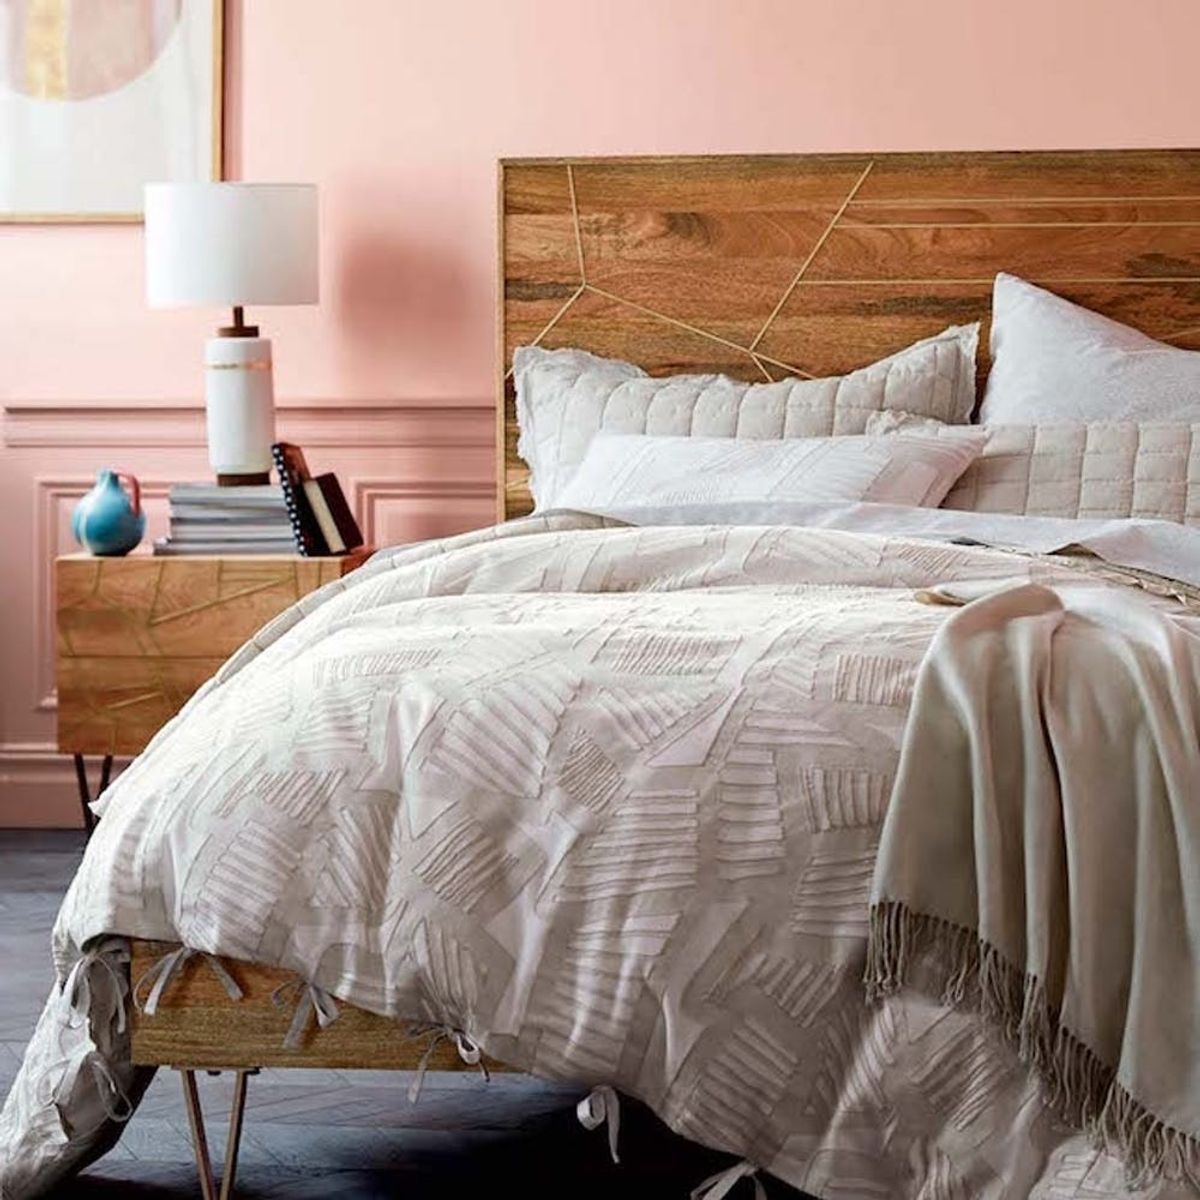 West Elm’s New Spring Collection Is All About That Small-Space Living